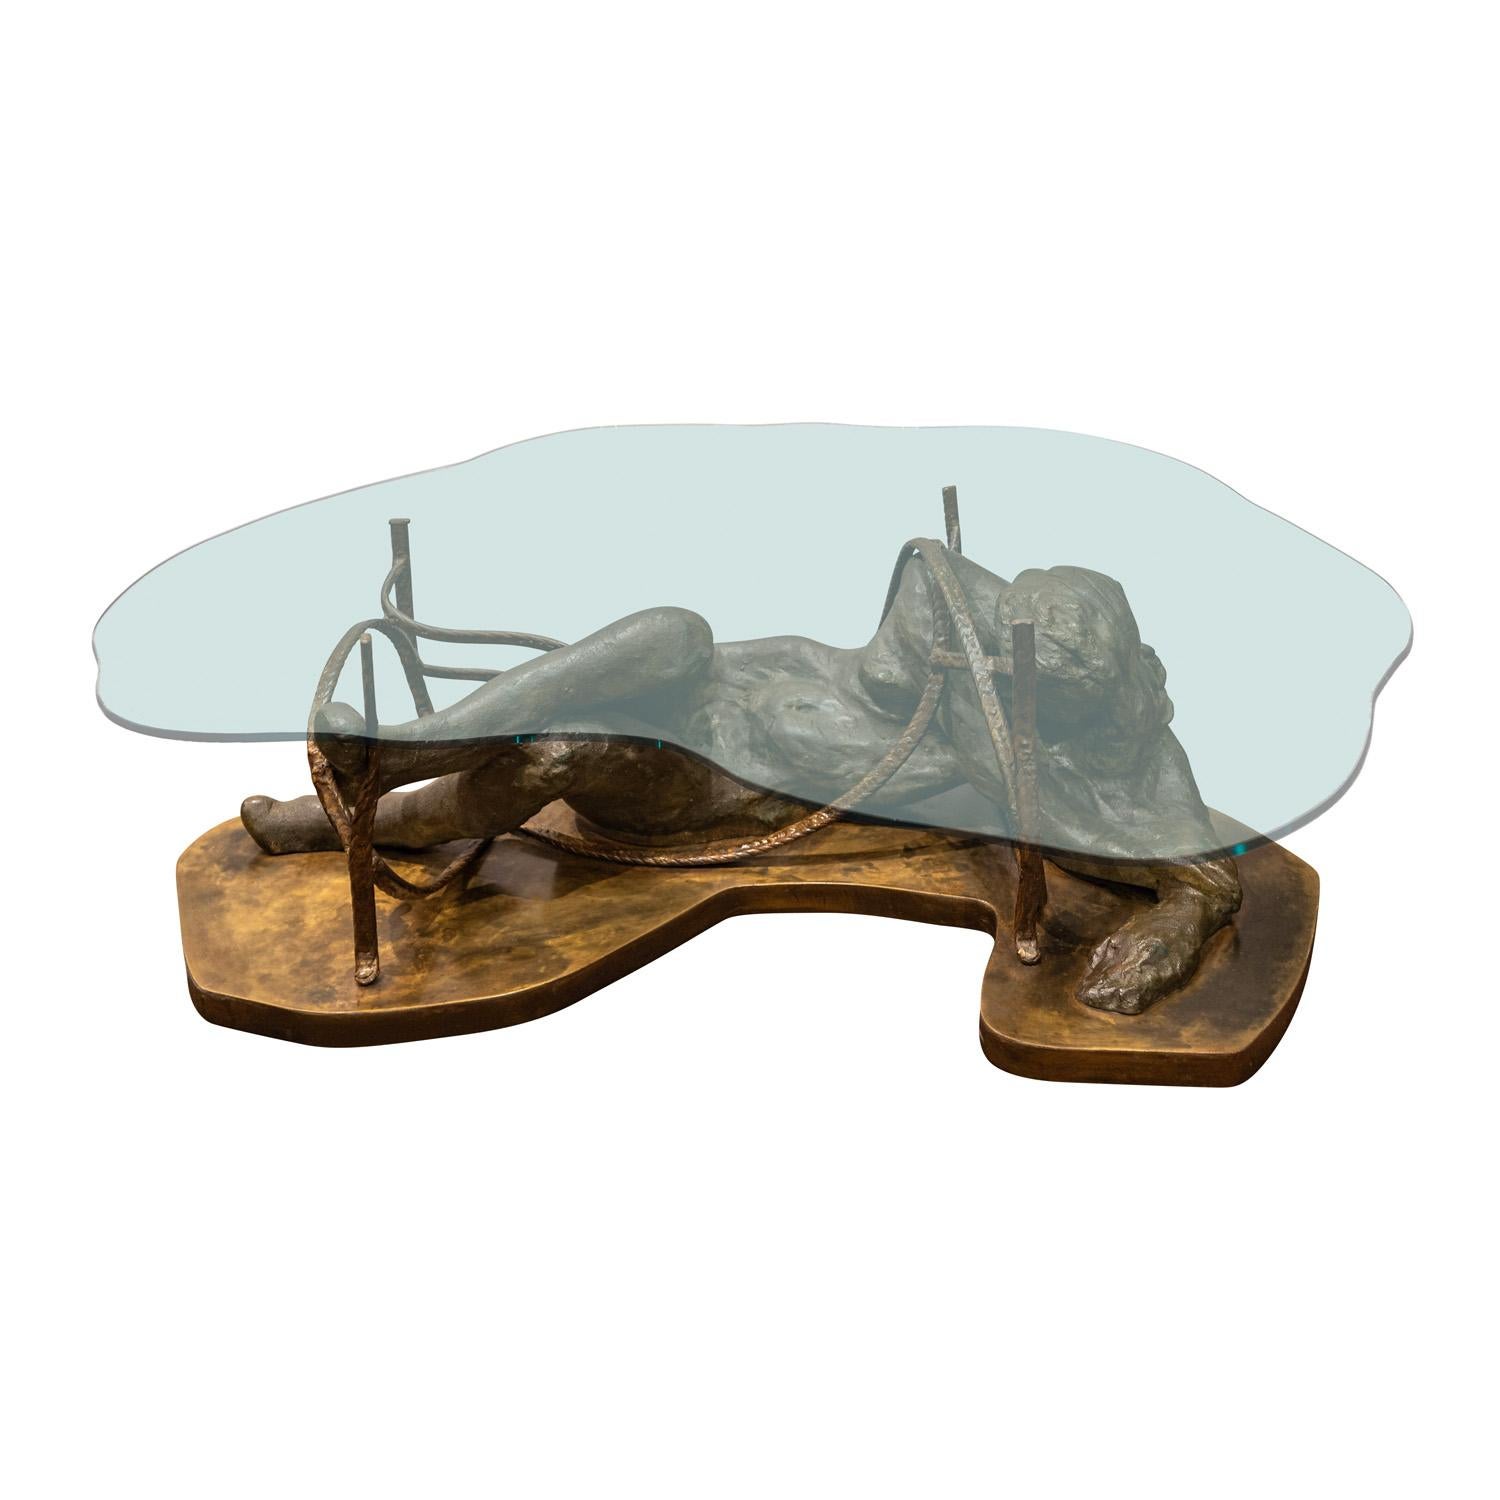 Rare and important “Repose” or “Brooding Woman” coffee table  with cast bronze female nude on a patinated base with bronze tones,  welded cords and glass top by Philip & Kelvin LaVerne, American 1970s (signed “Philip Kelvin LaVerne” on base).  This